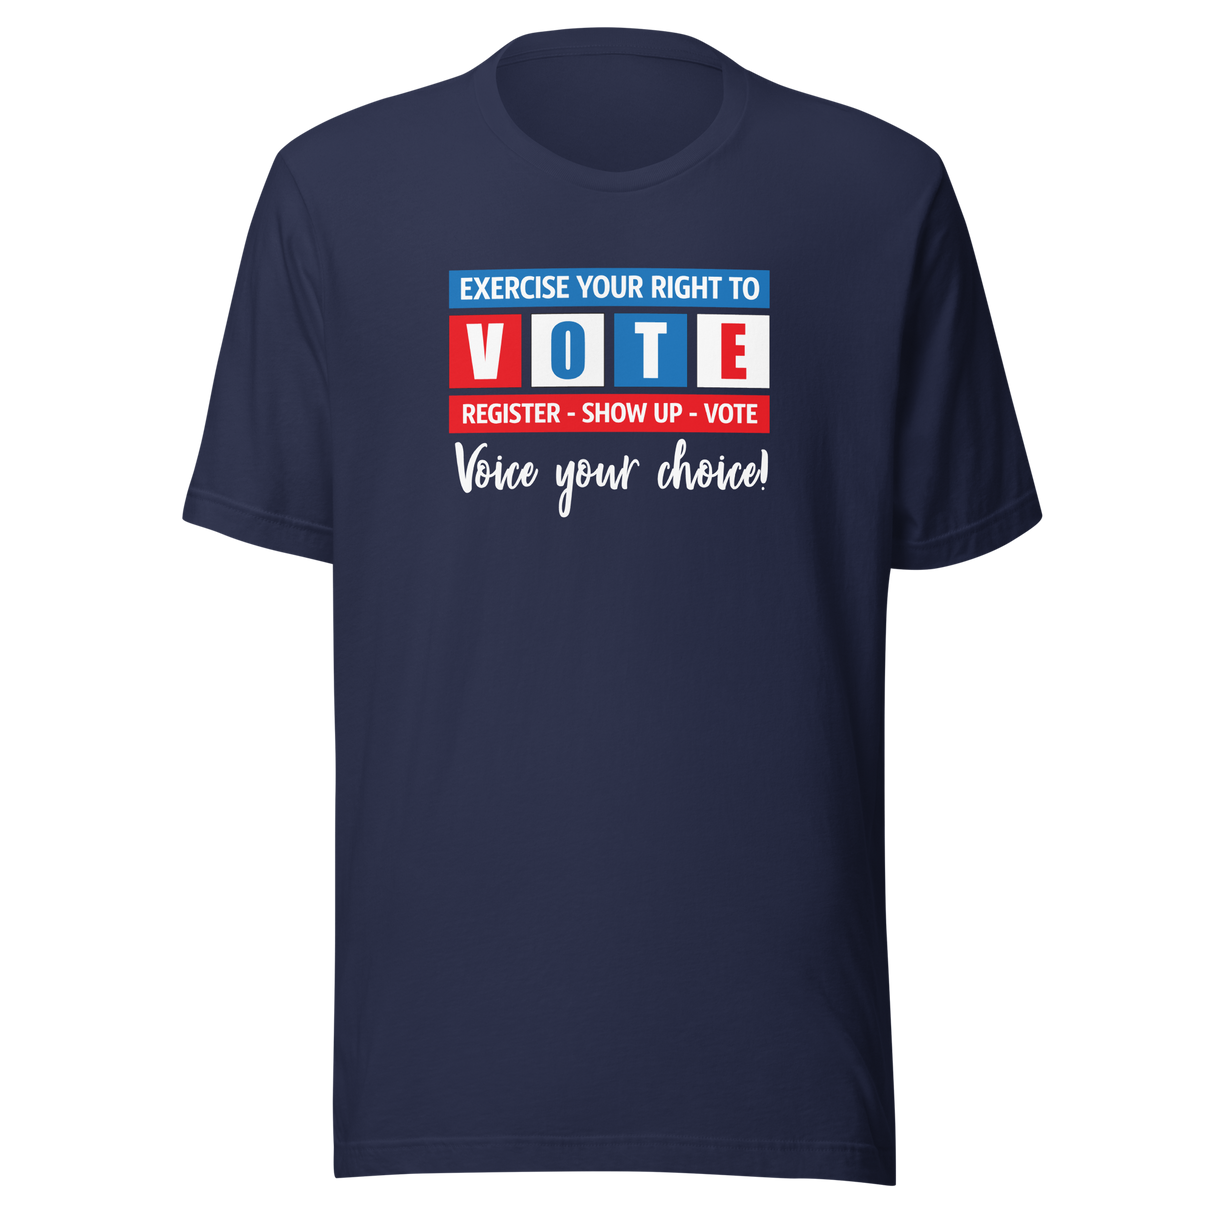 exercise-your-right-to-vote-voice-your-choice-vote-tee-exercise-t-shirt-gerrymandering-tee-voting-t-shirt-election-tee#color_navy